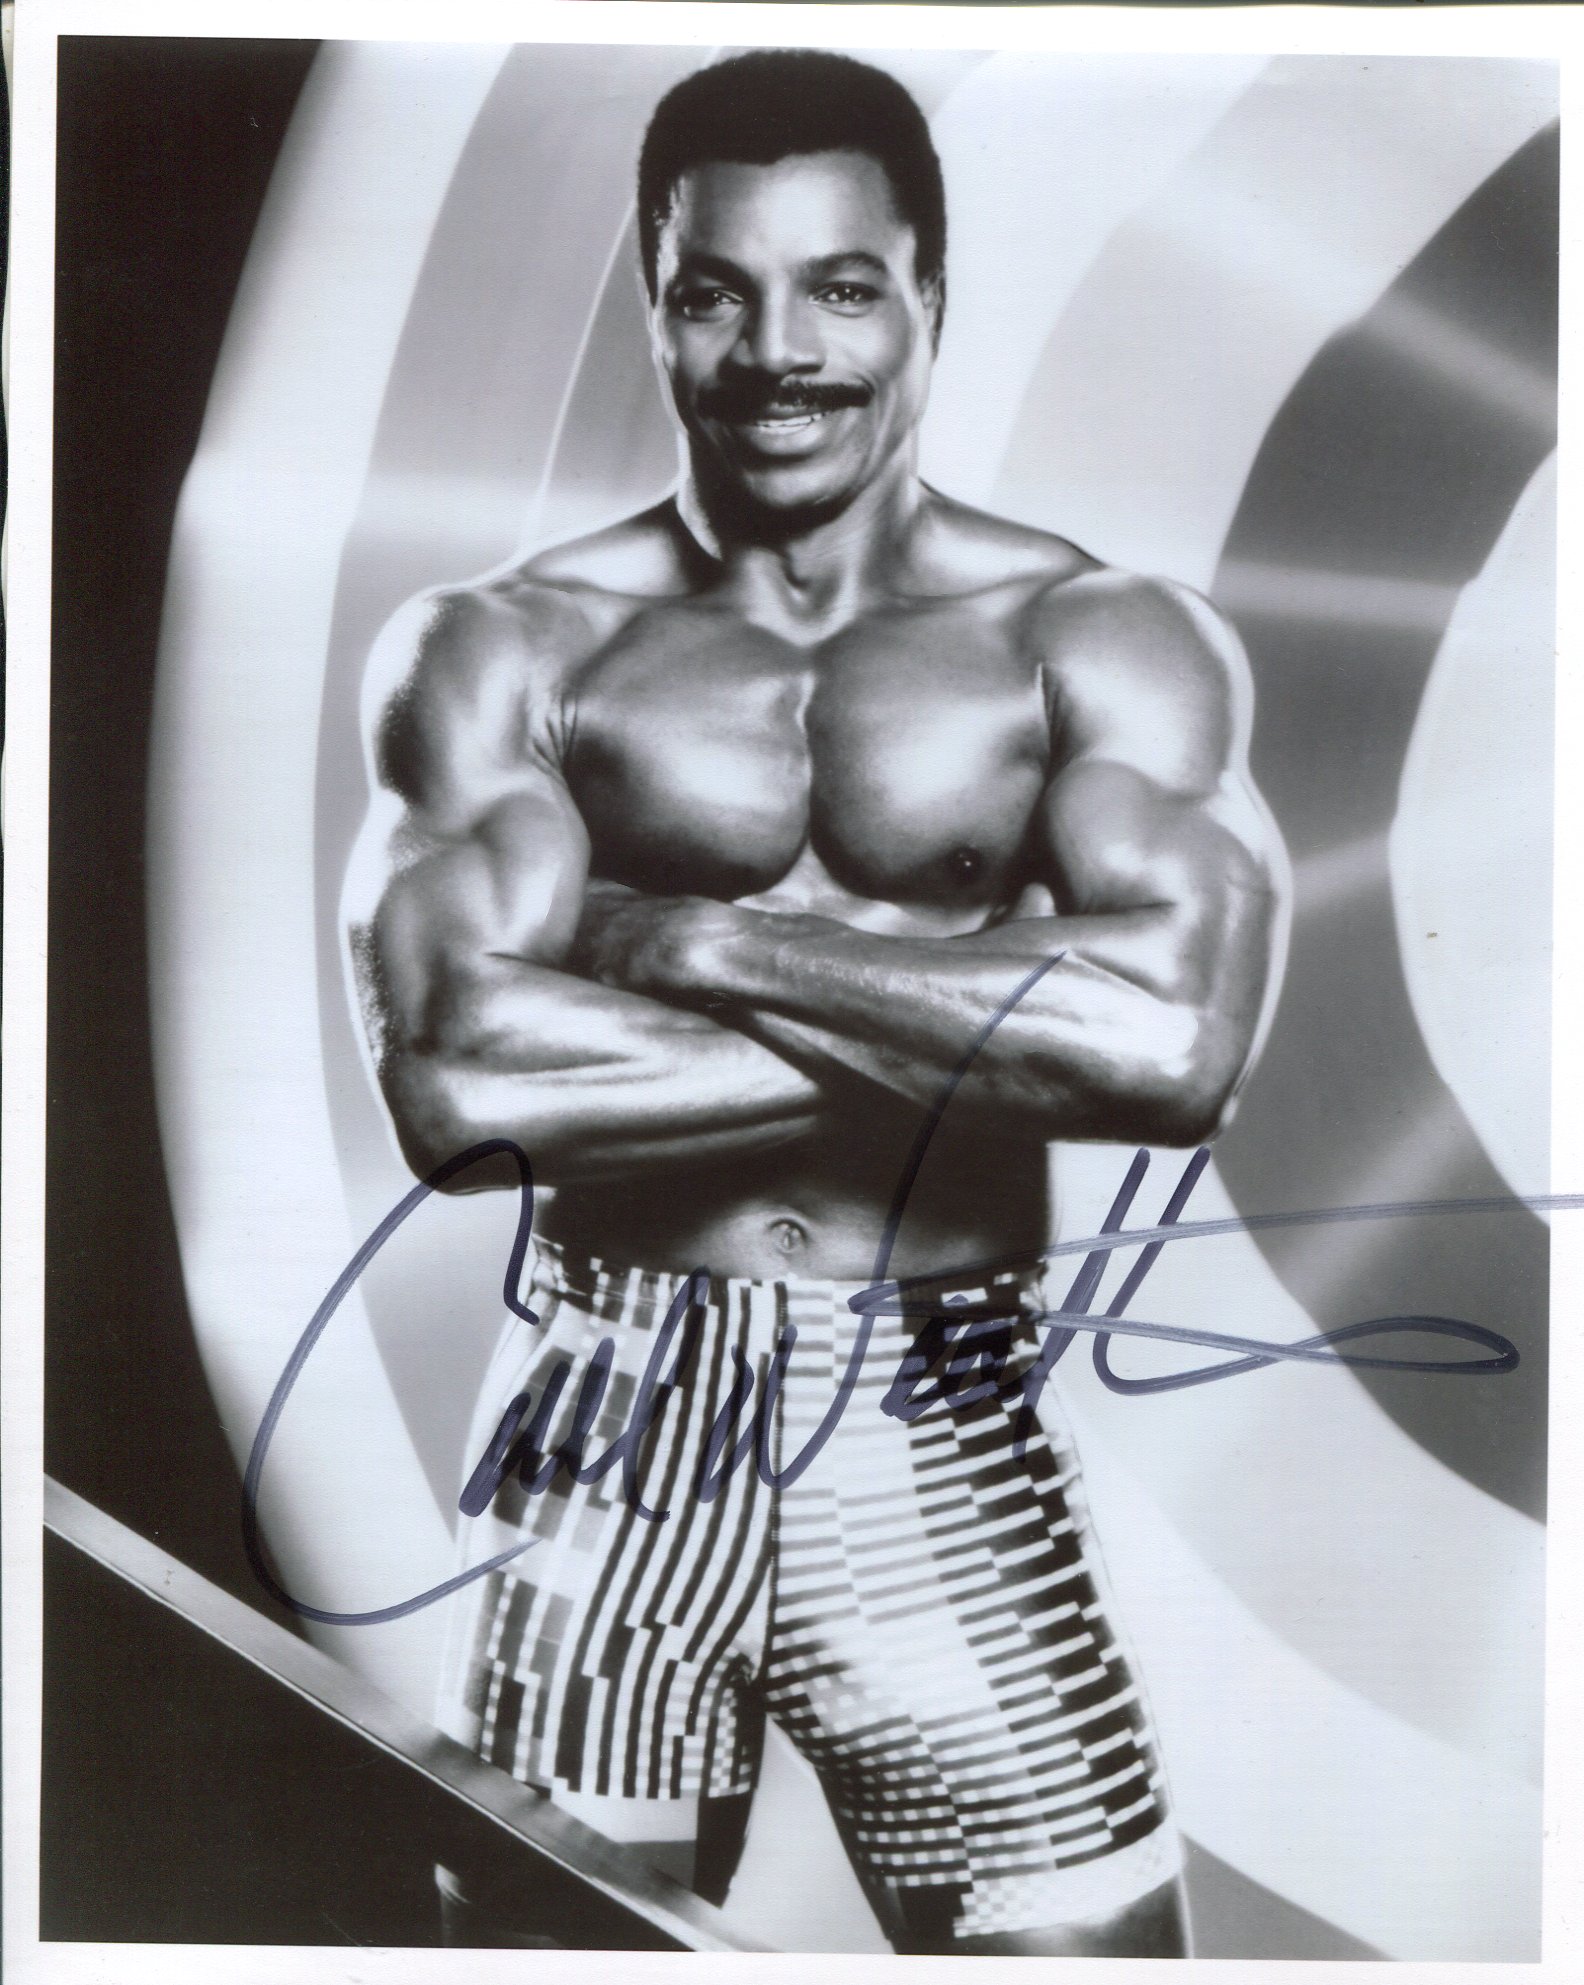 Carl Weathers, stunning 8x10 Rocky movie photo signed by actor Carl Weathers. Good condition. All